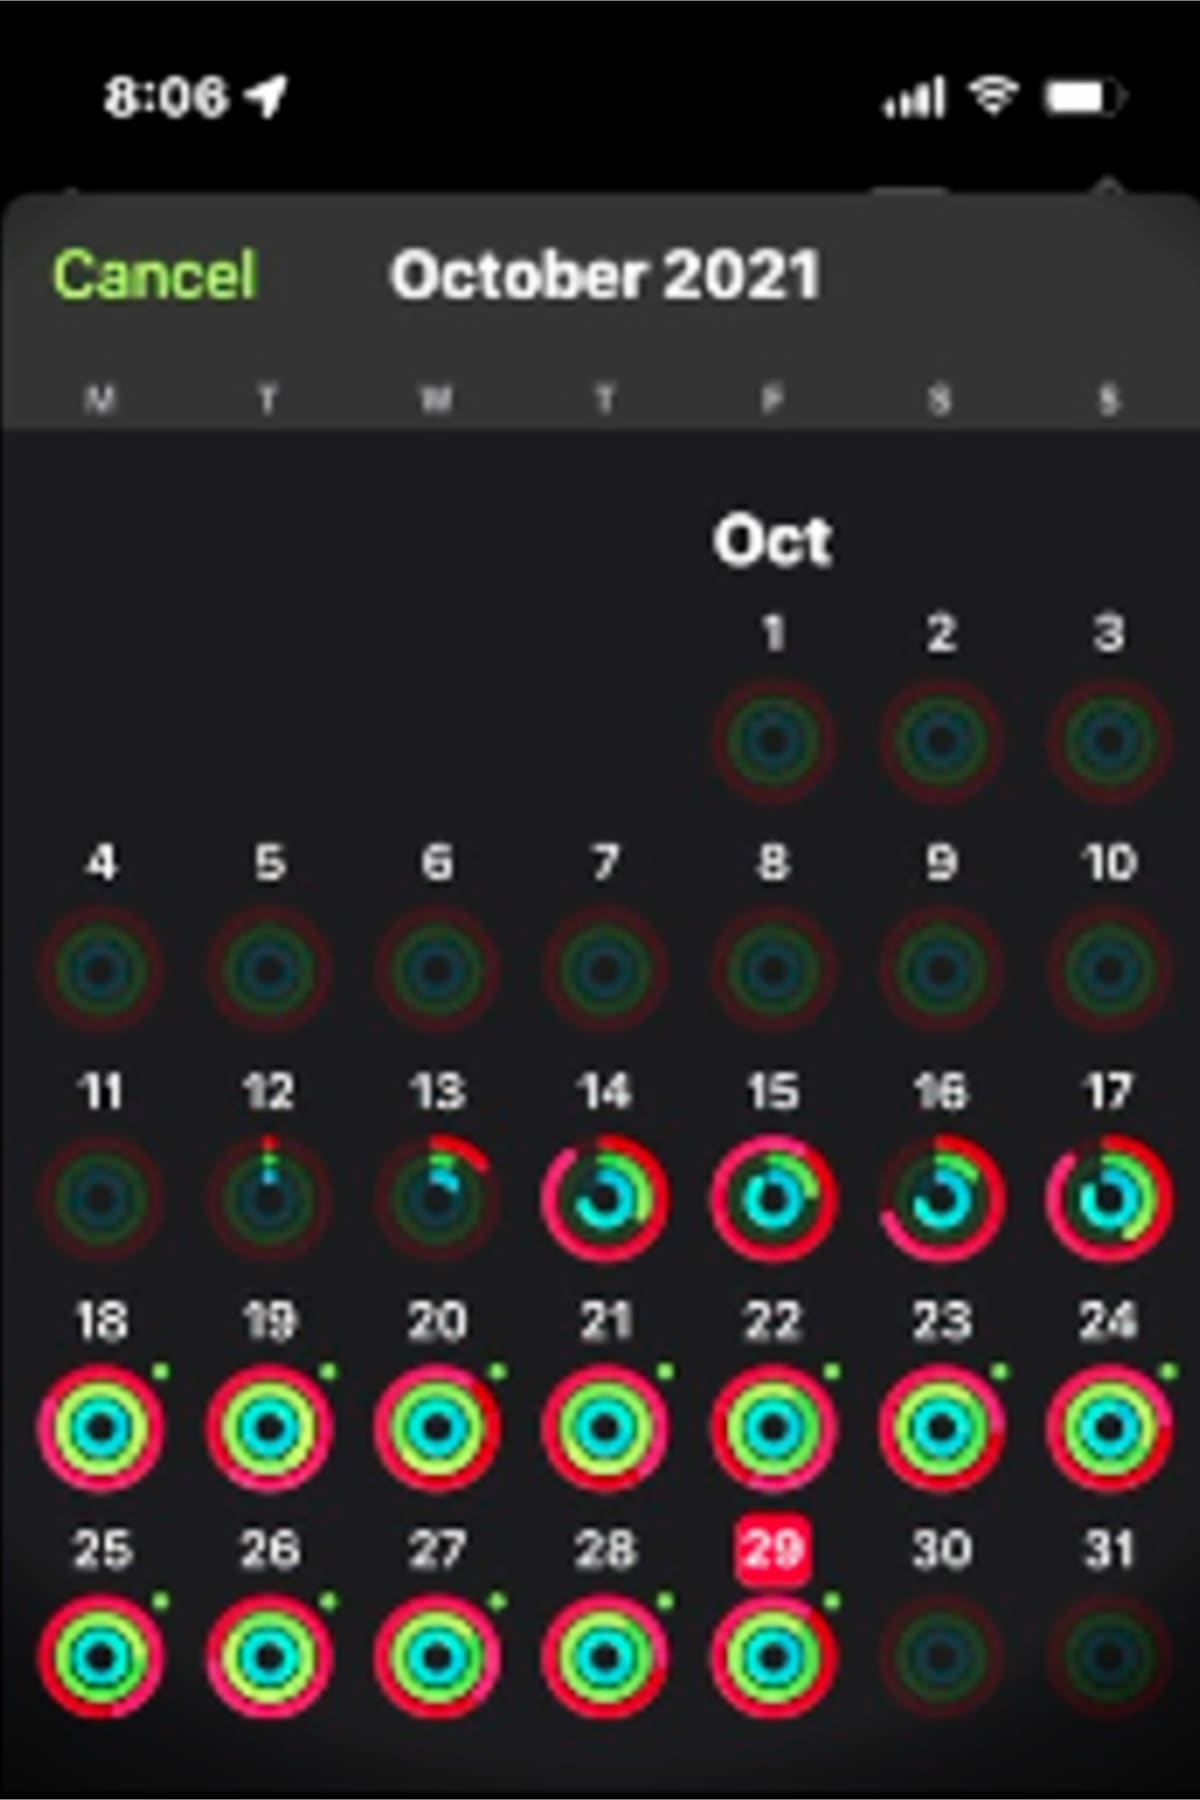 10 minute decluttering challenges help me declutter my home AND close all my Apple Watch fitness rings every day